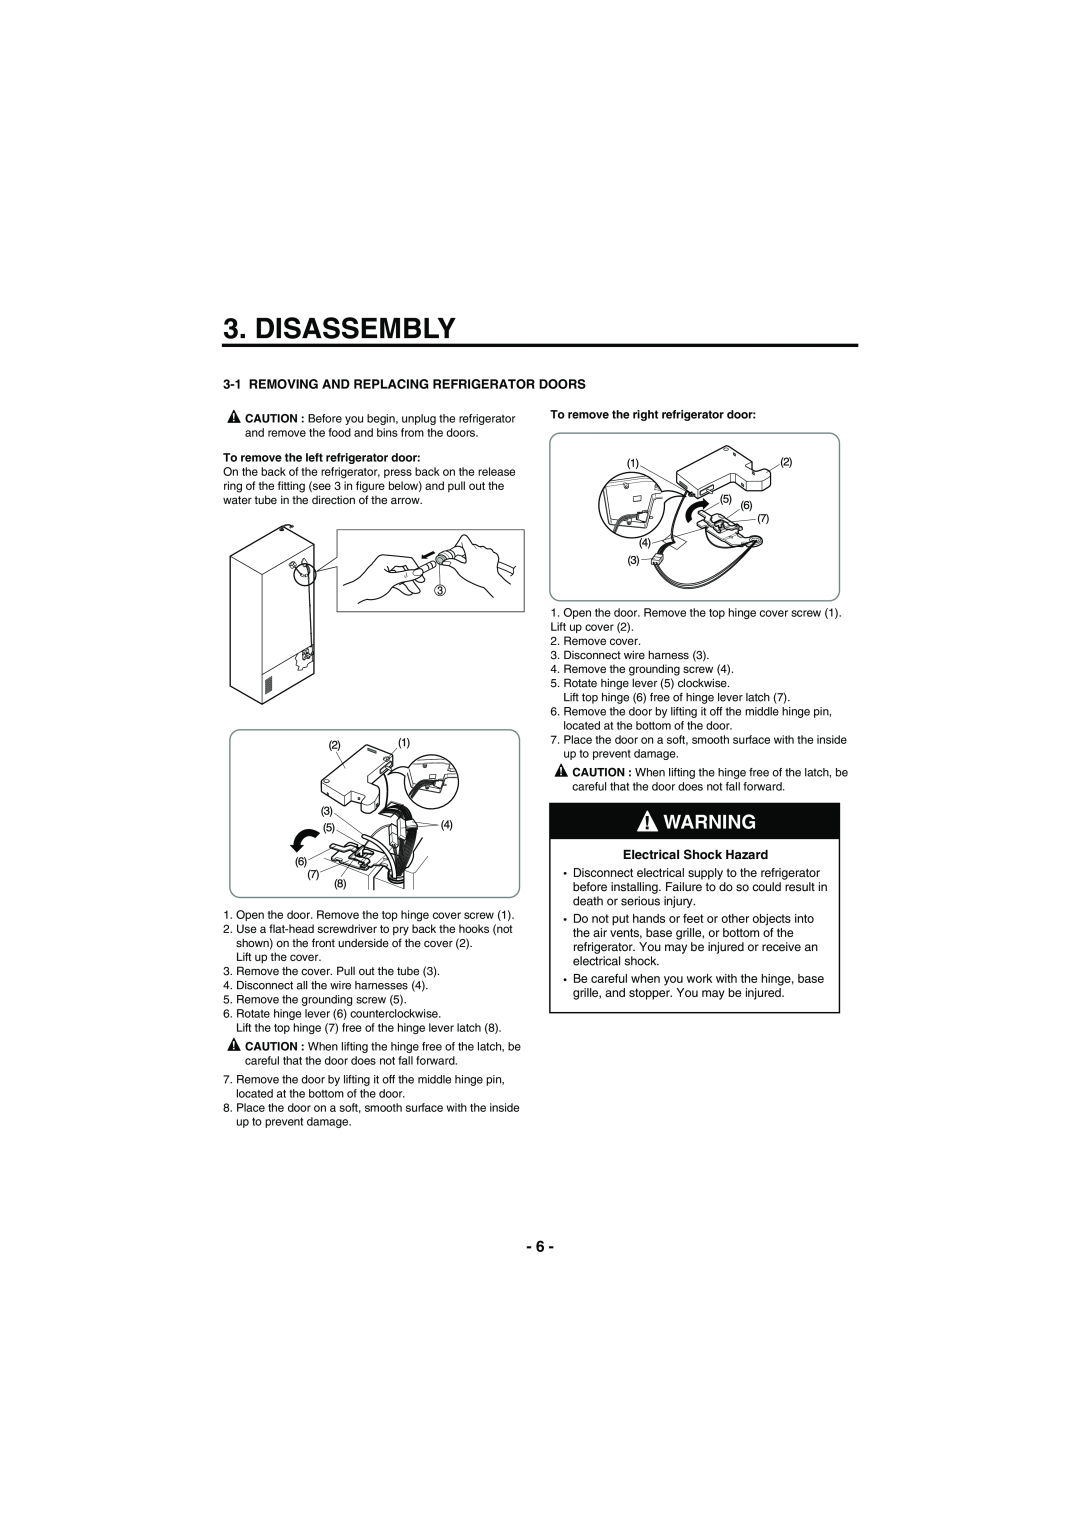 Kenmore 795-71022.010 service manual Disassembly, Removing And Replacing Refrigerator Doors, Electrical Shock Hazard 